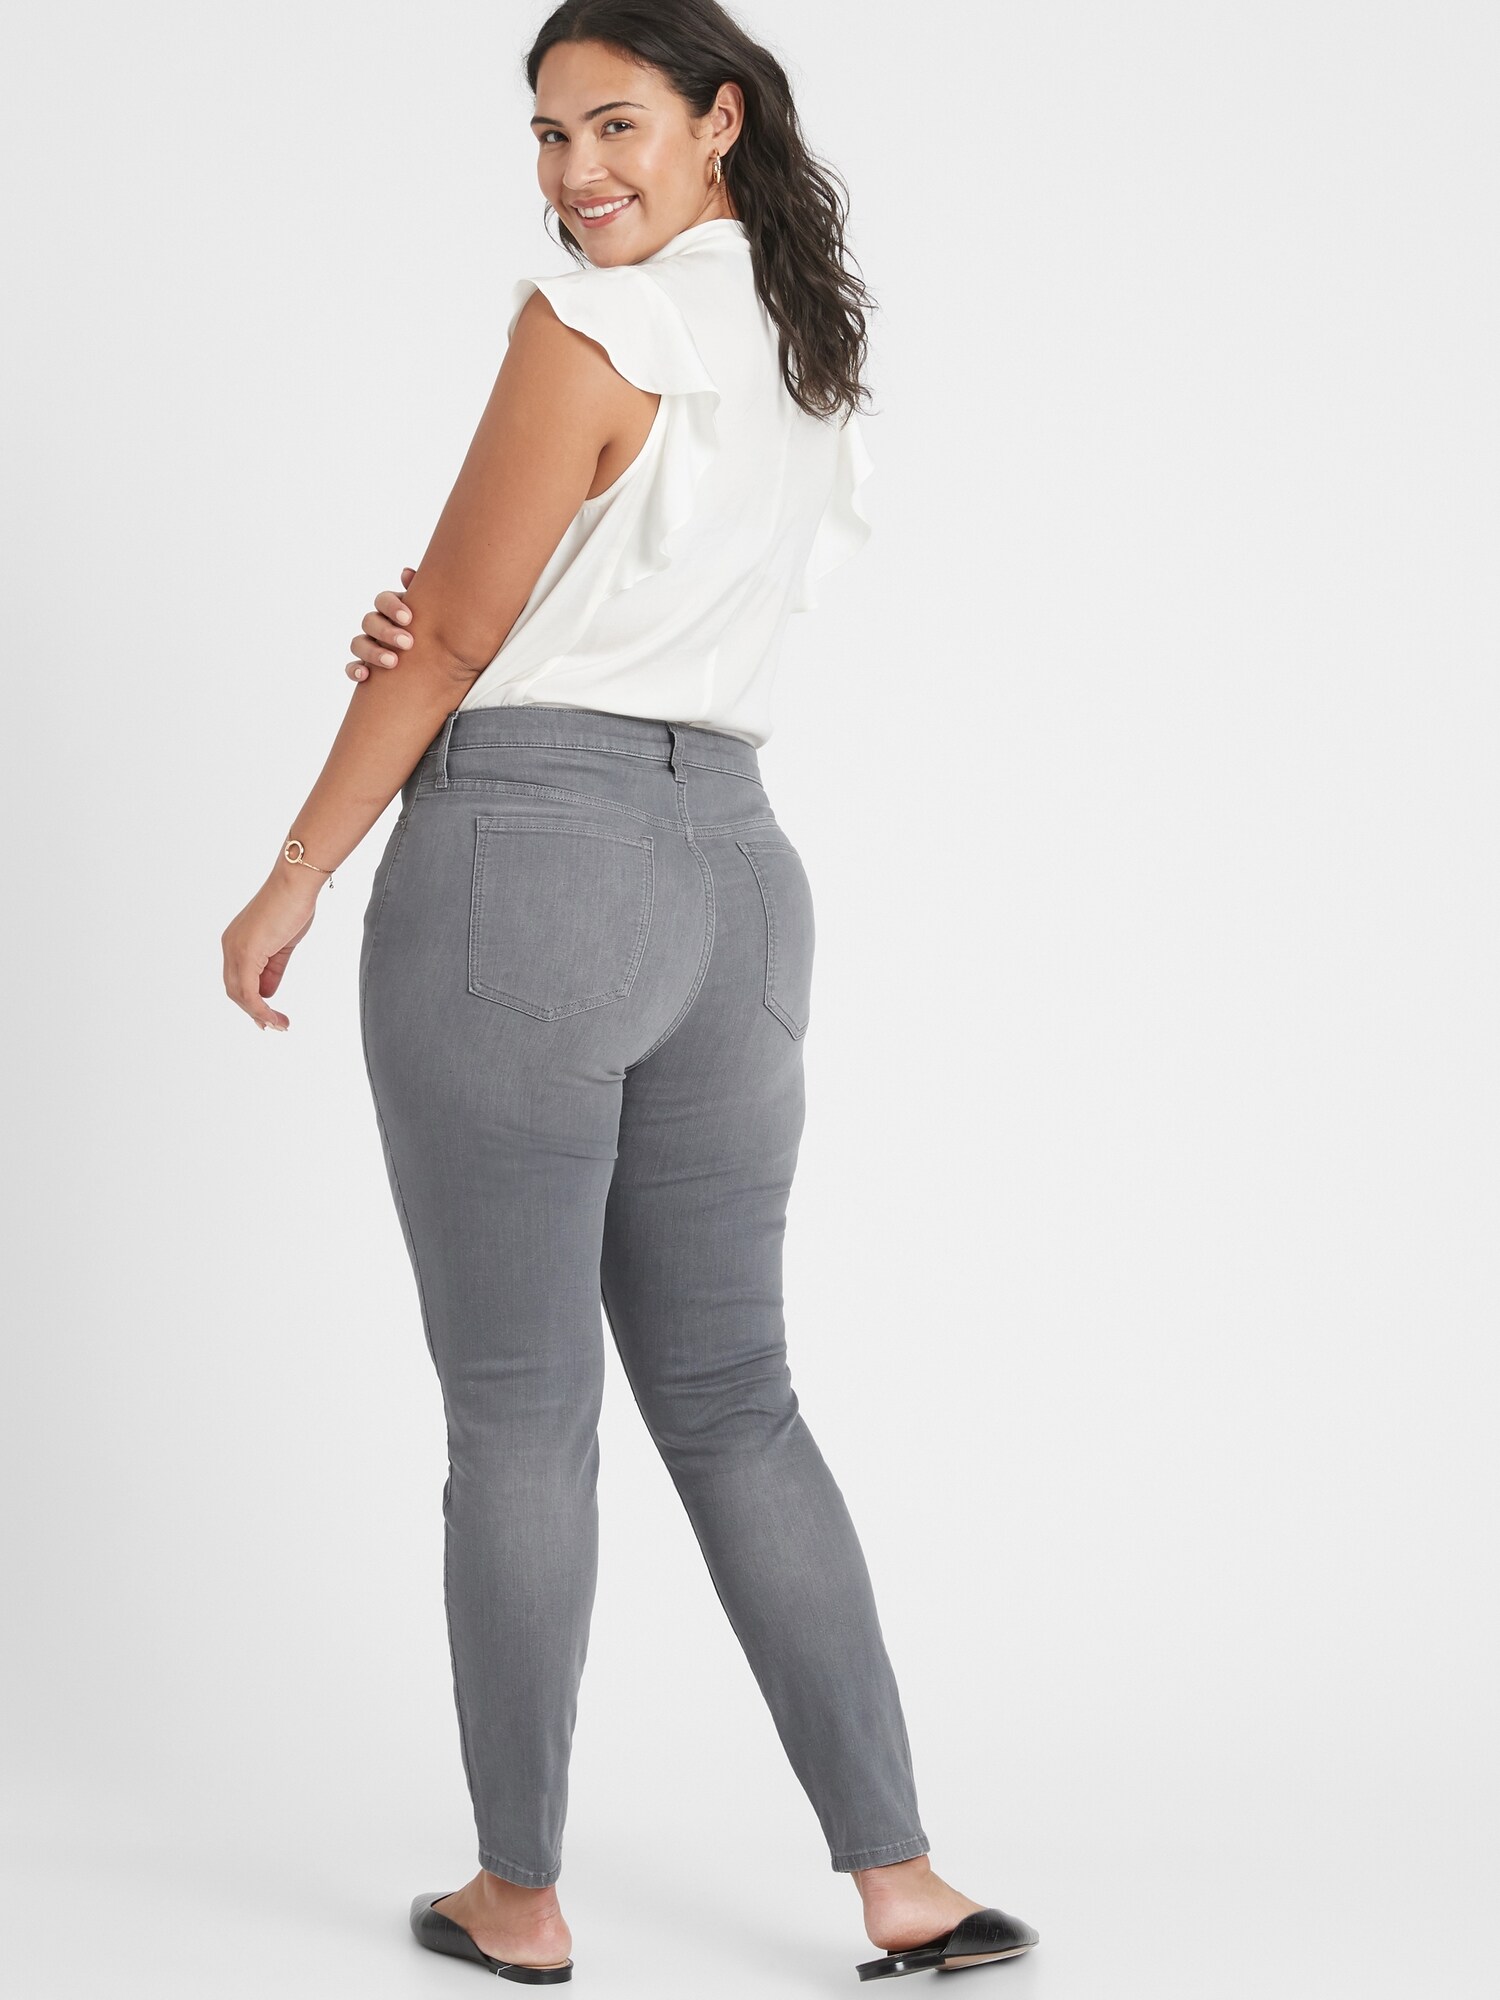 Curvy High-Rise Washed Out Grey Skinny Jean | Banana Republic Factory